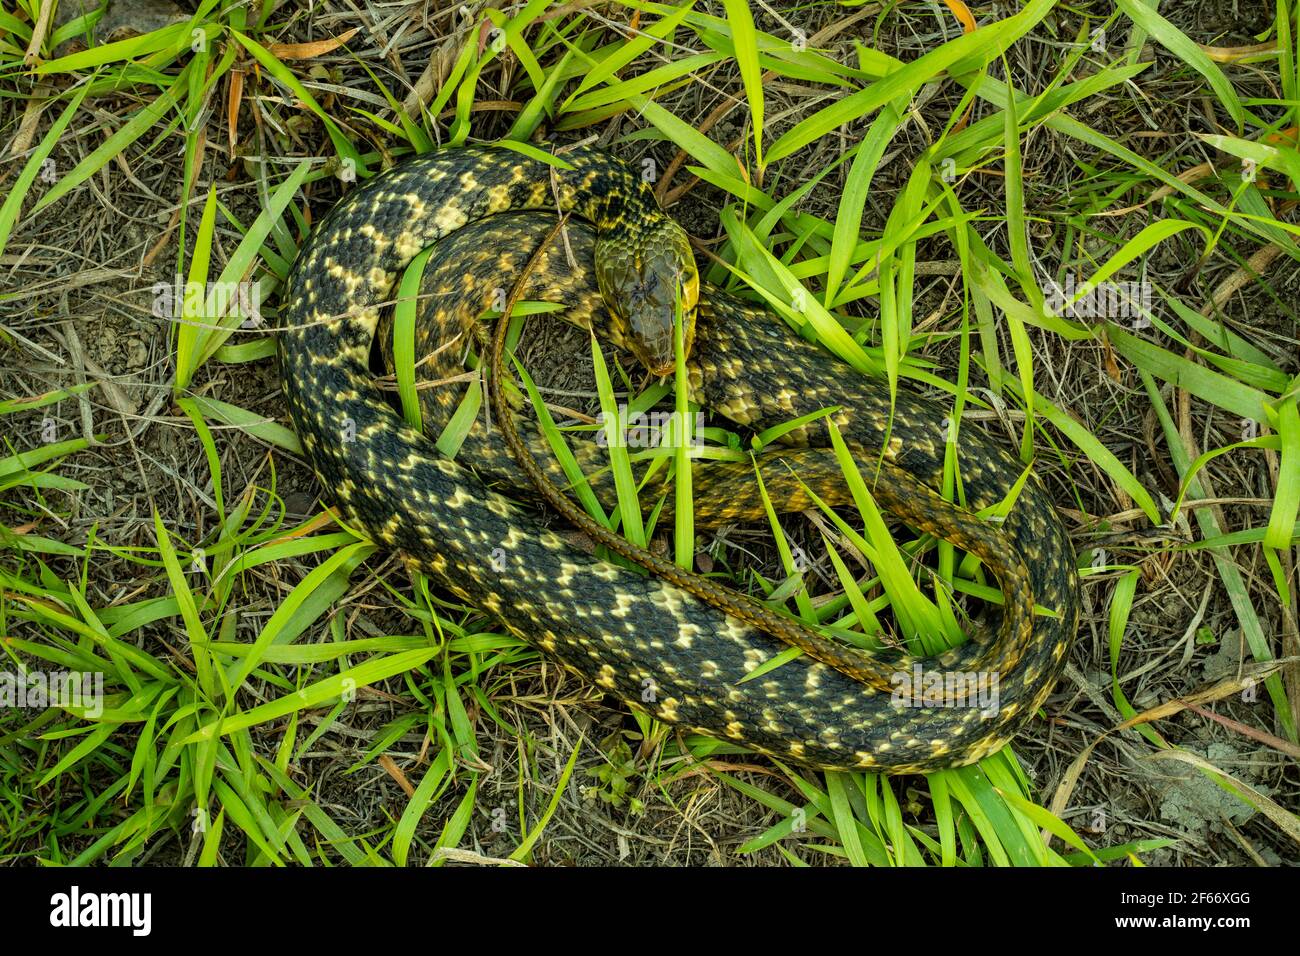 Amphiesma stolatum or Buff striped keelback snake sitting in the green grass in the morning.It is the sole species of the genus Amphiesma. It is a typ Stock Photo